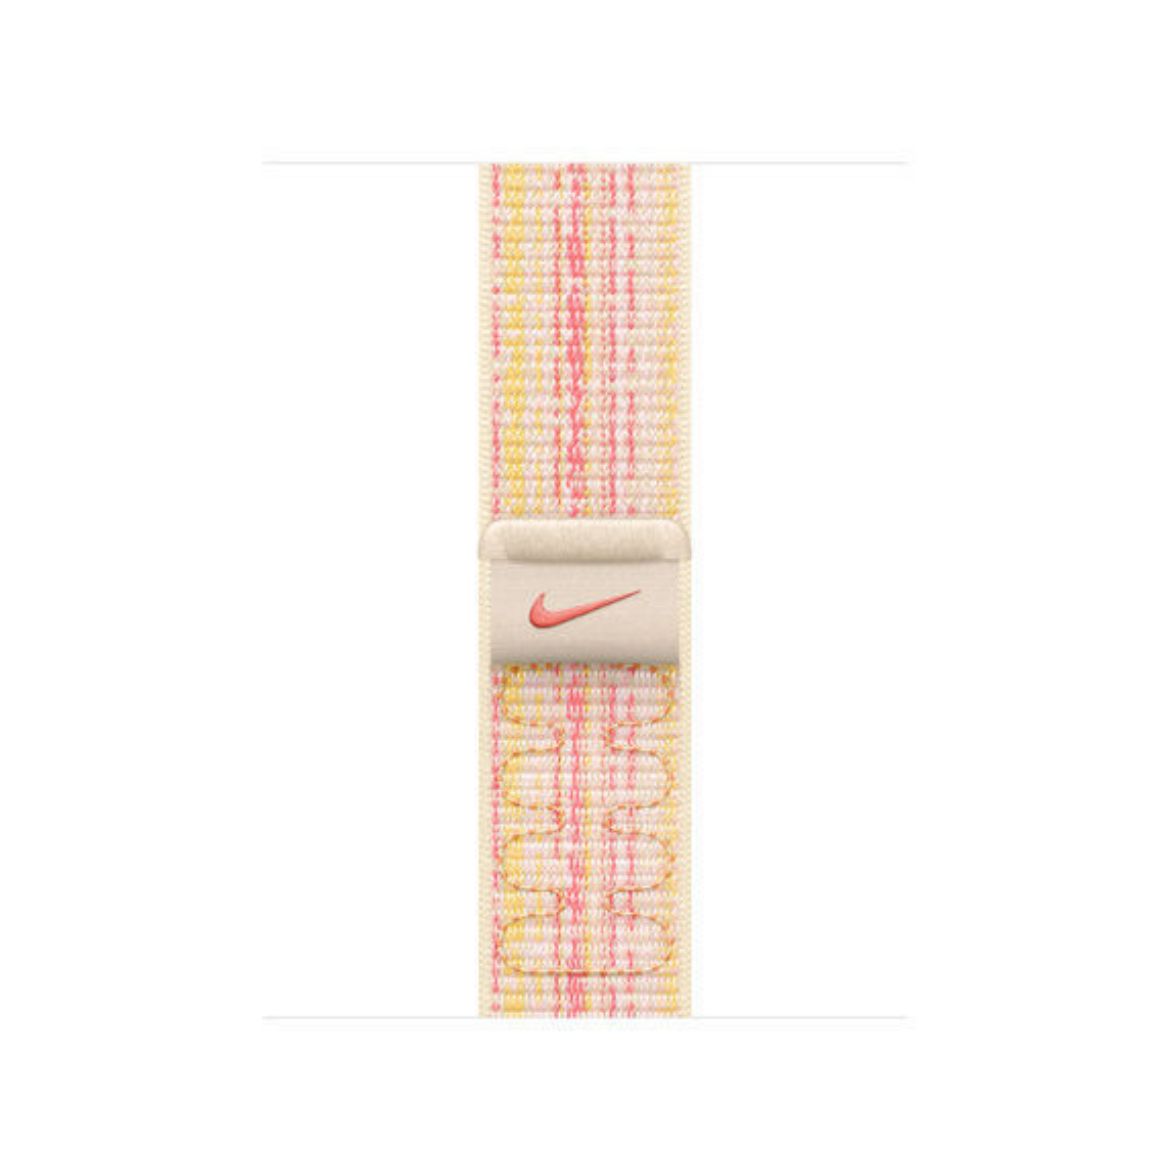 Picture of Apple Nike Sport Loop for Apple Watch 41/40/38mm - Starlight/Pink